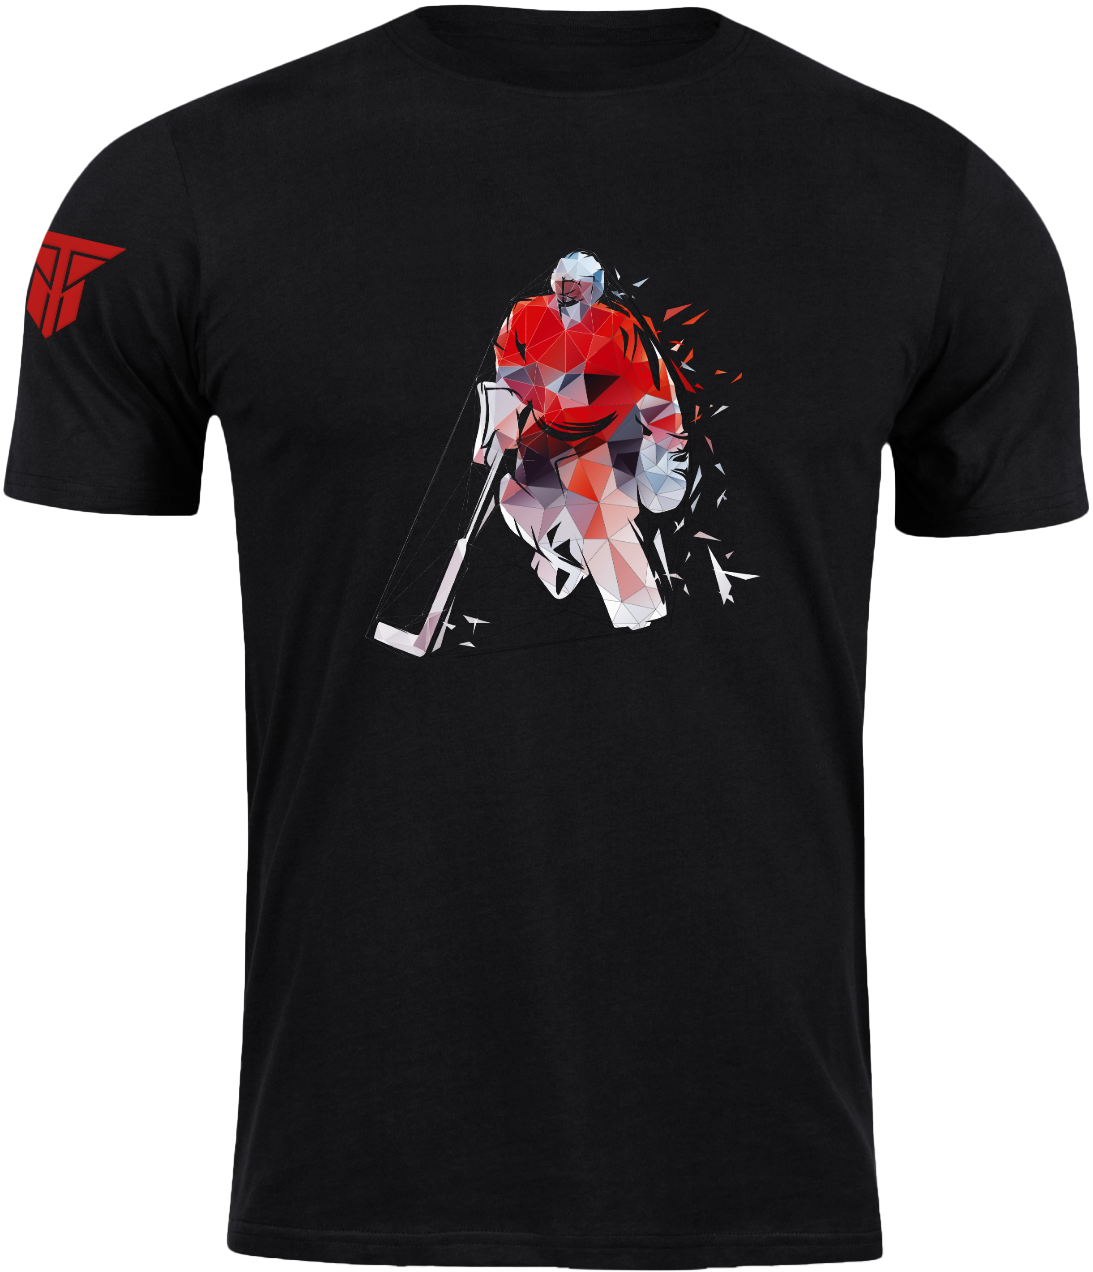 Puck Stops Here T-Shirt